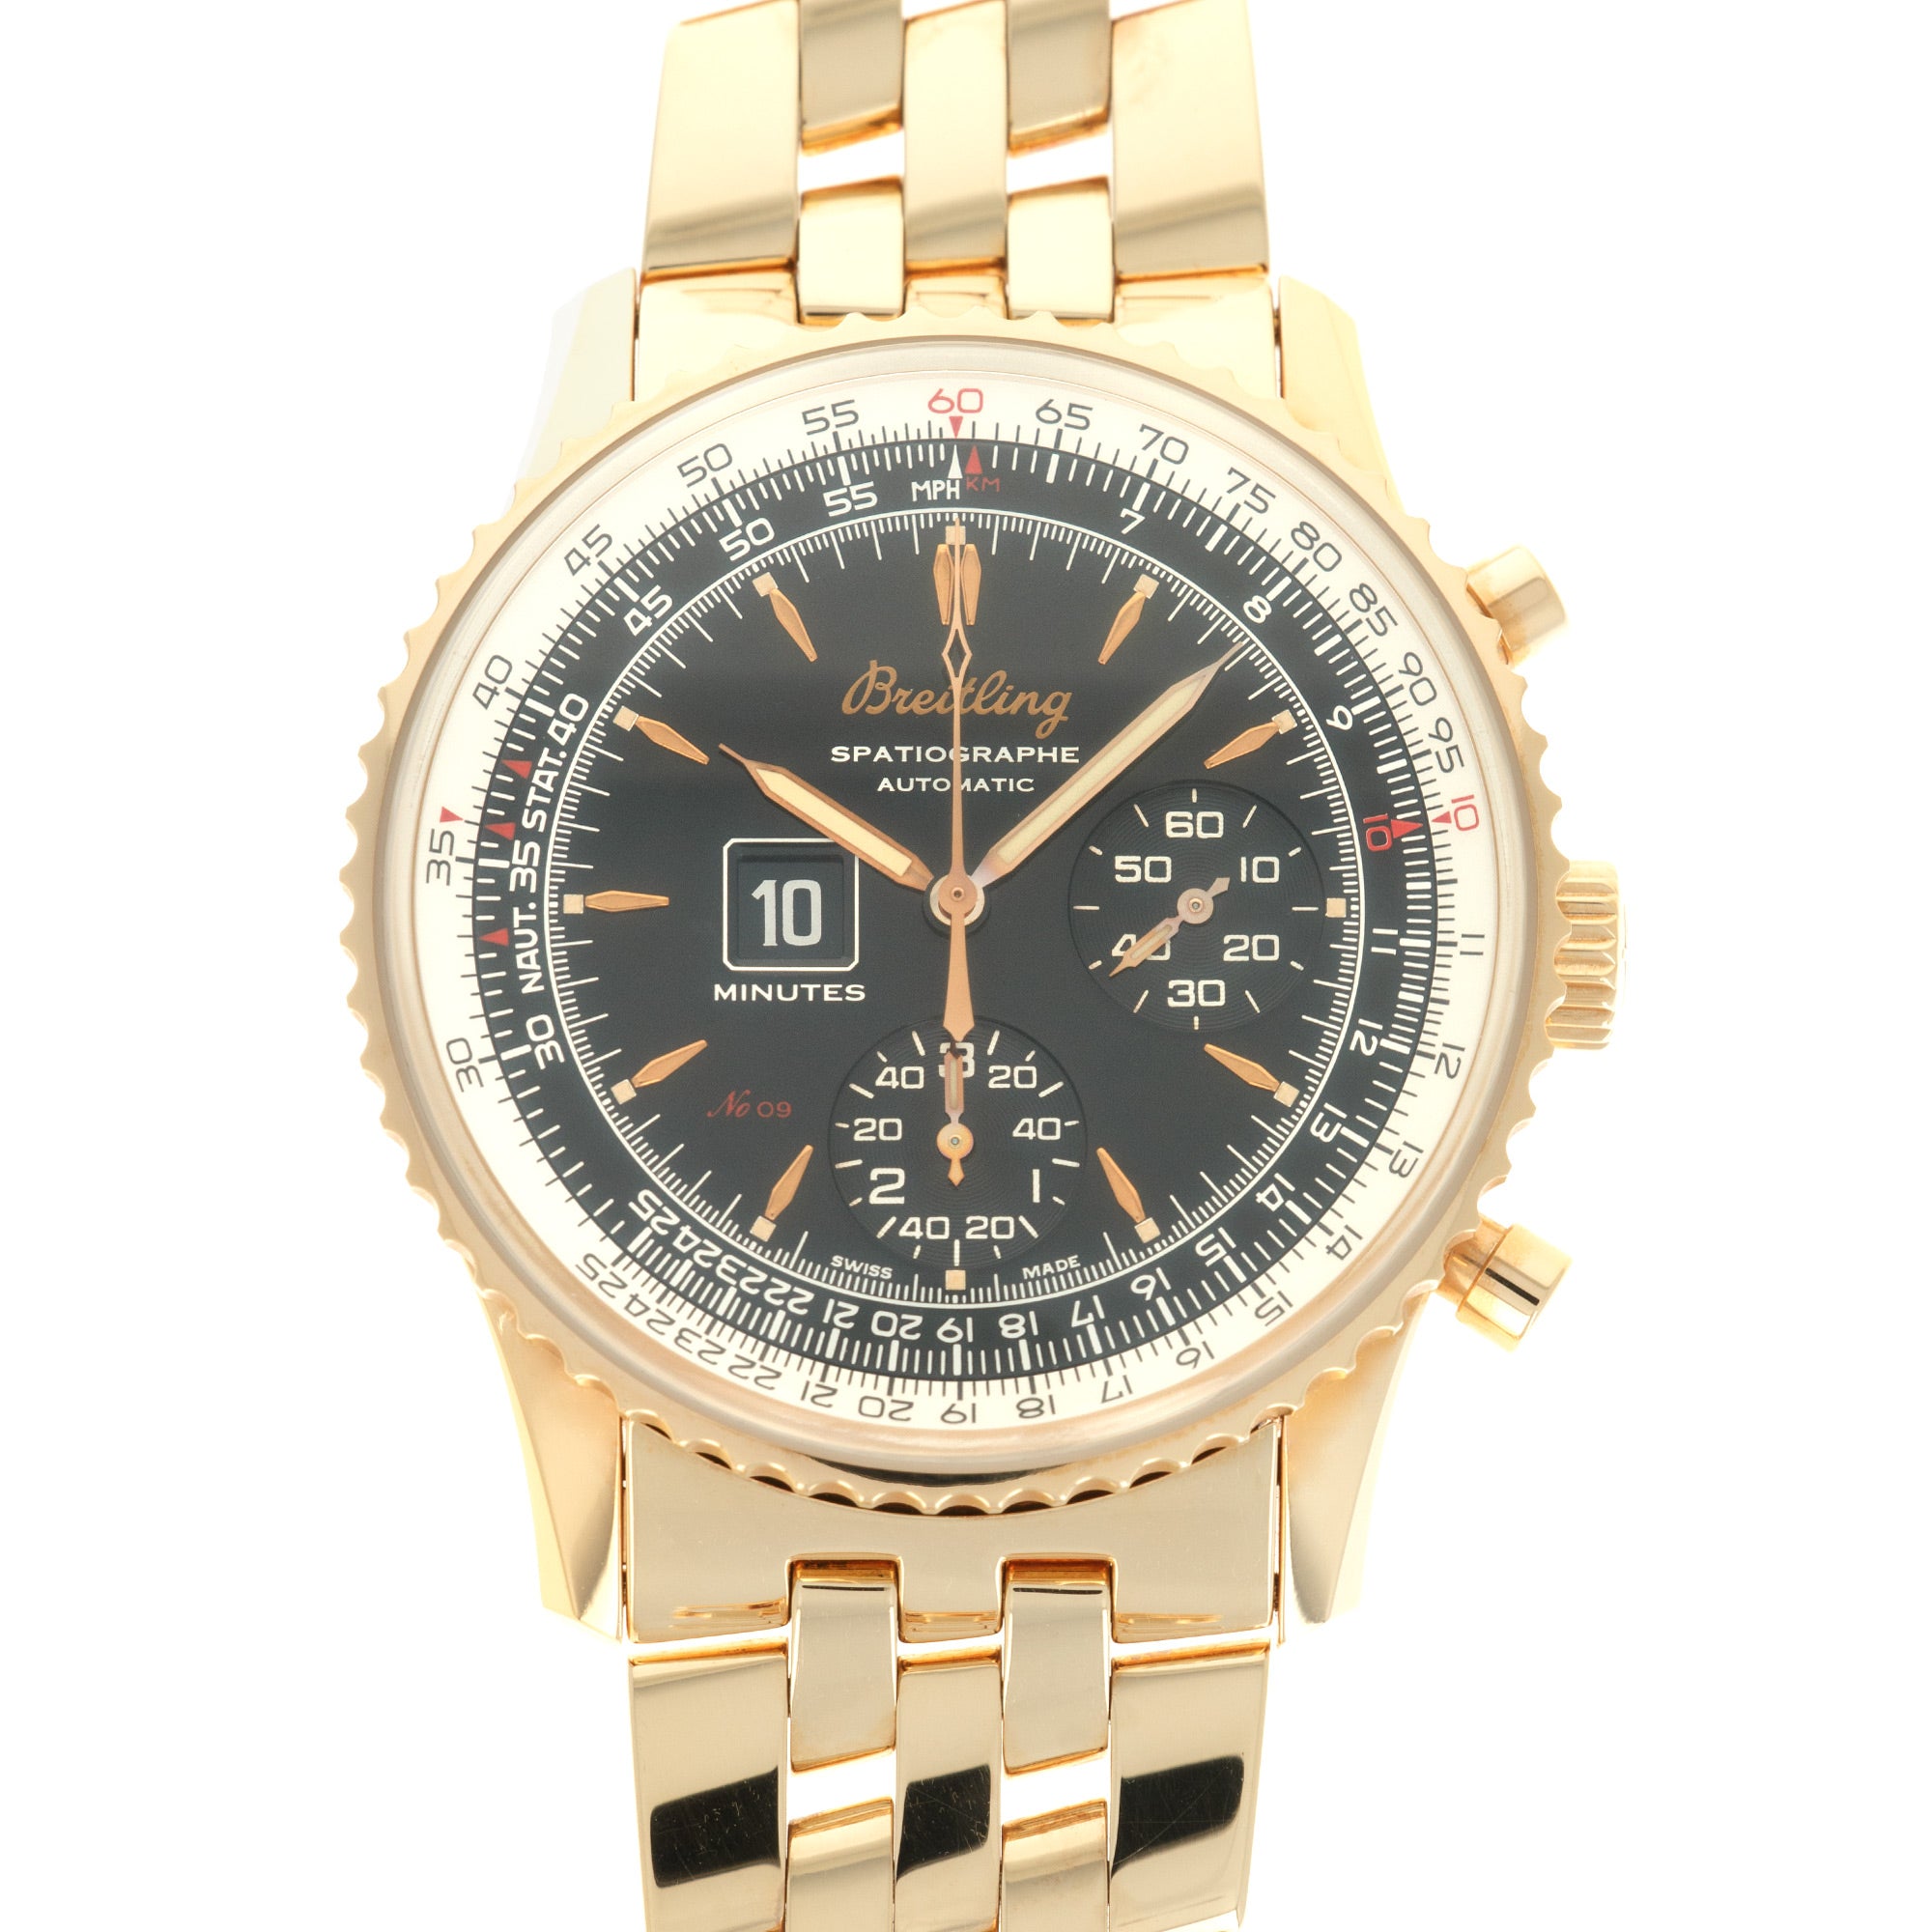 Breitling Yellow Gold Montbrilliant Spatiographe Watch